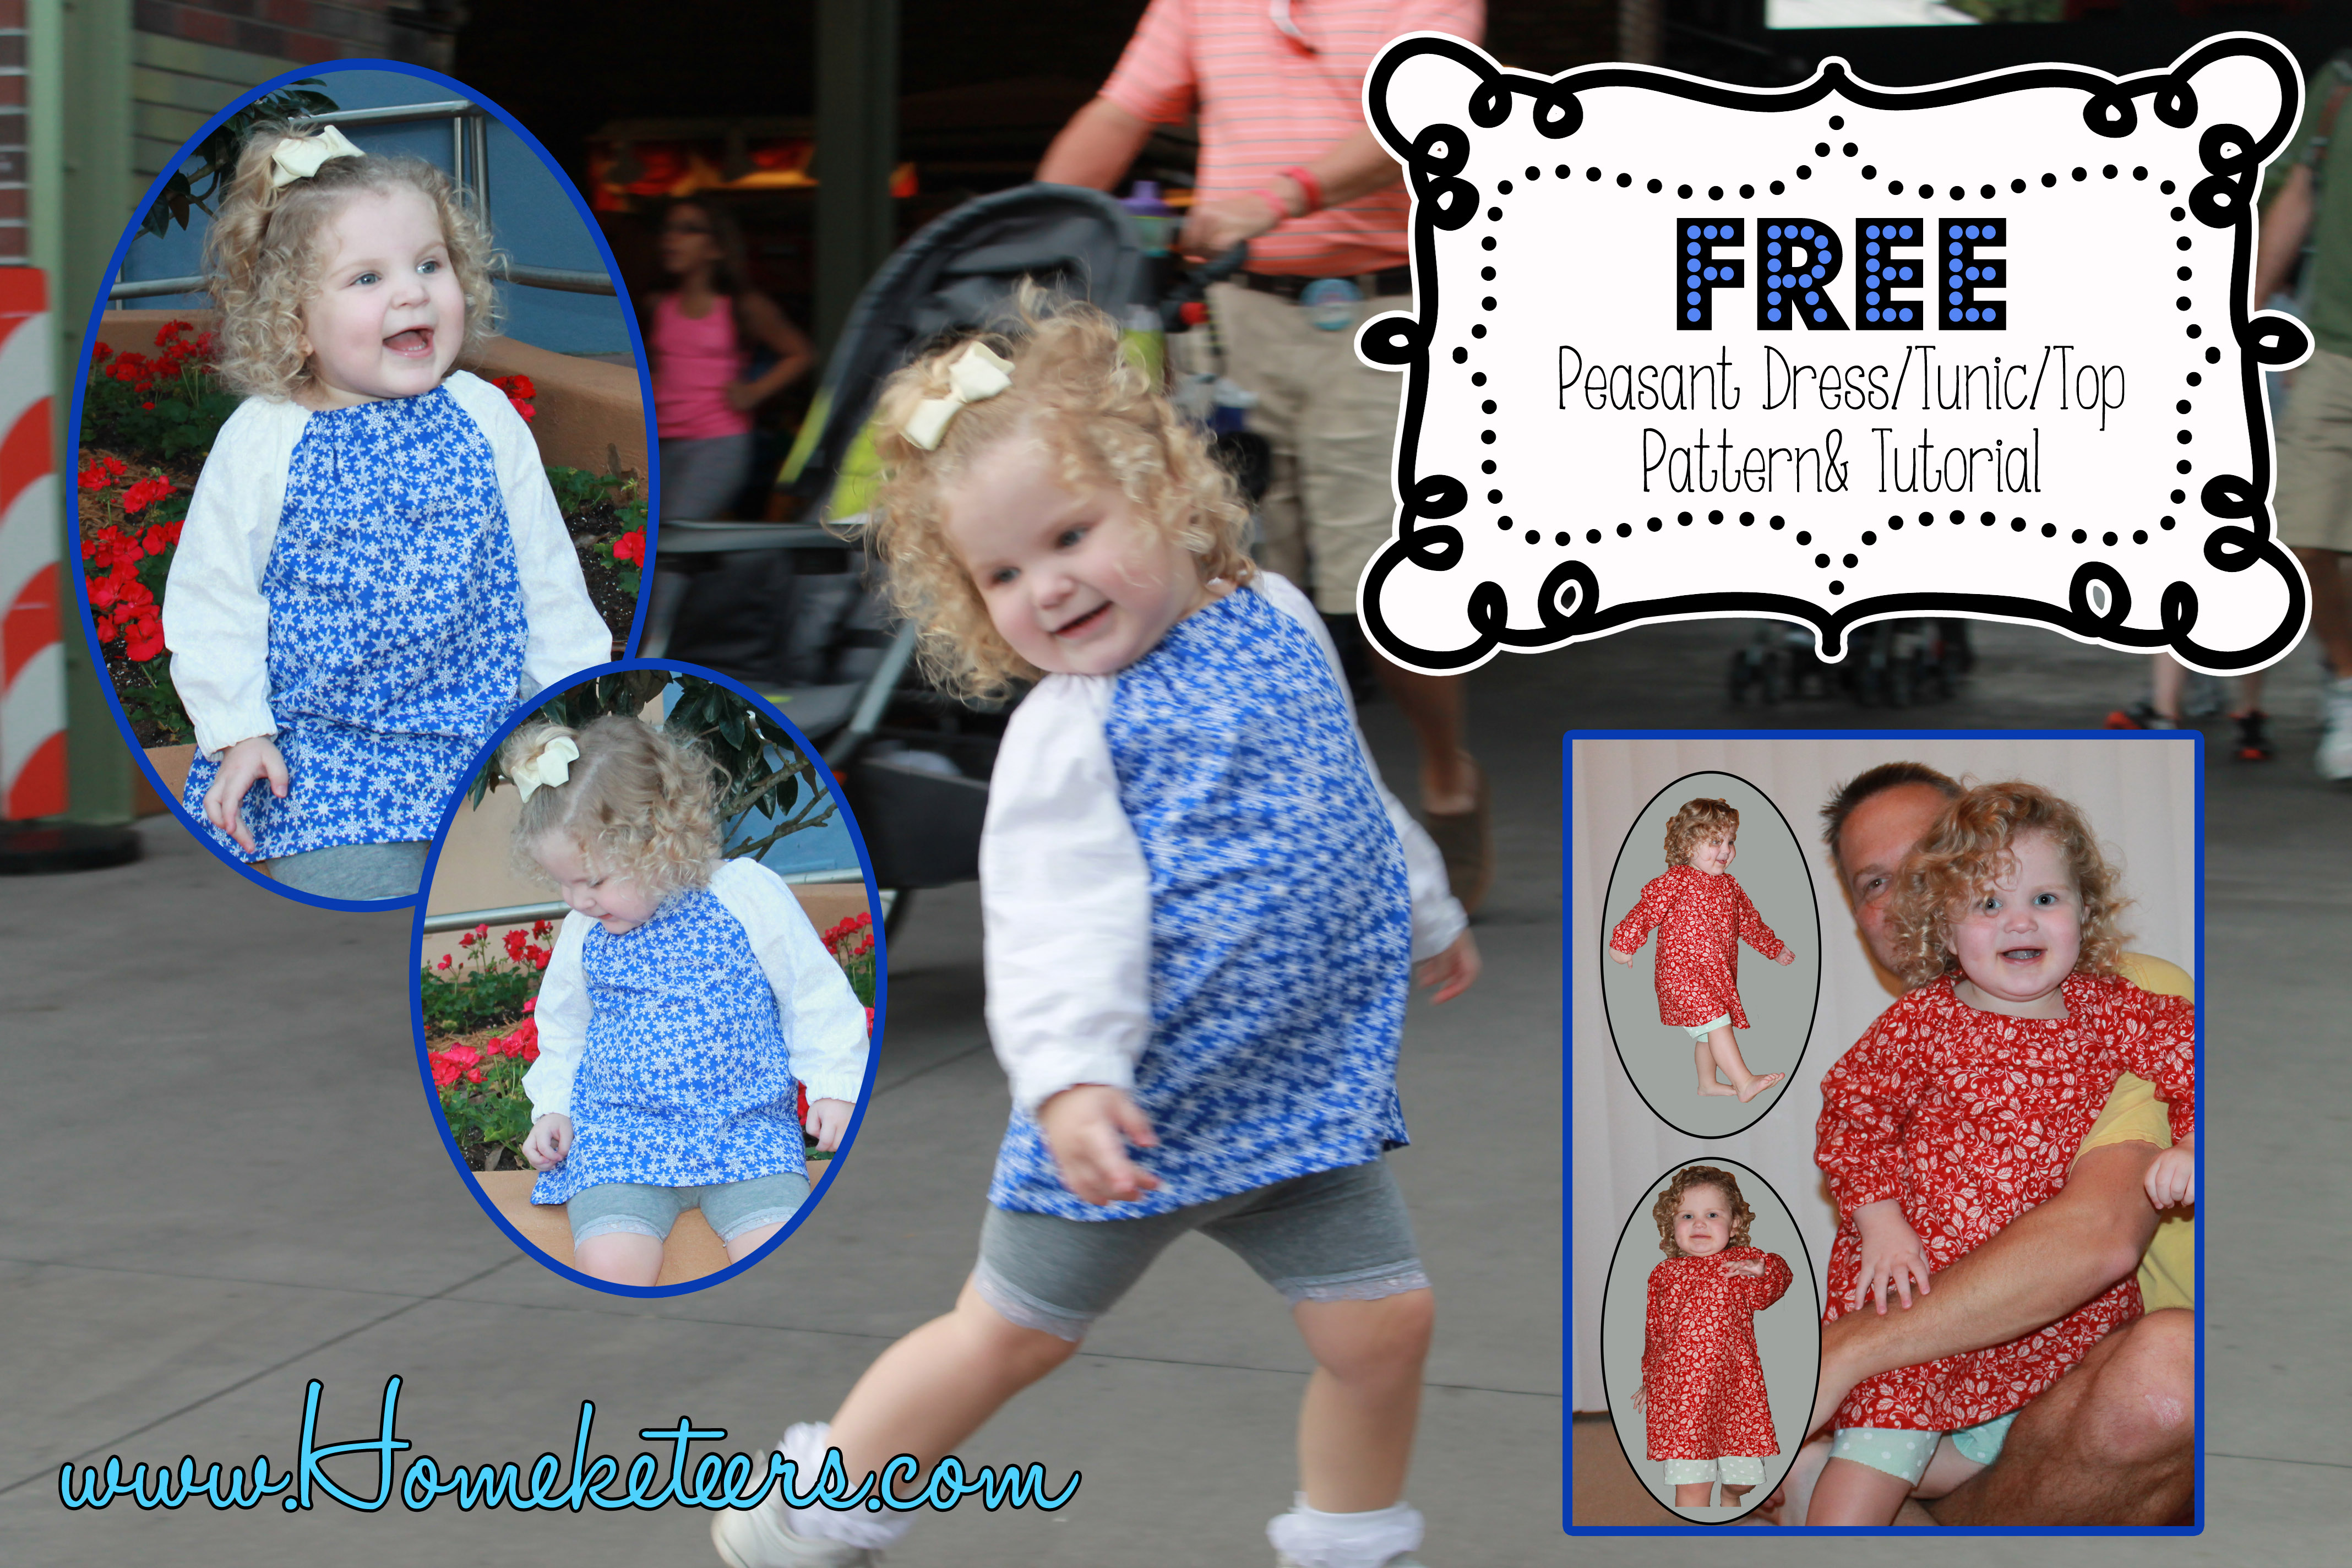 Sew a Girls Peasant Dress/Top ~ Free Pattern & Instructions